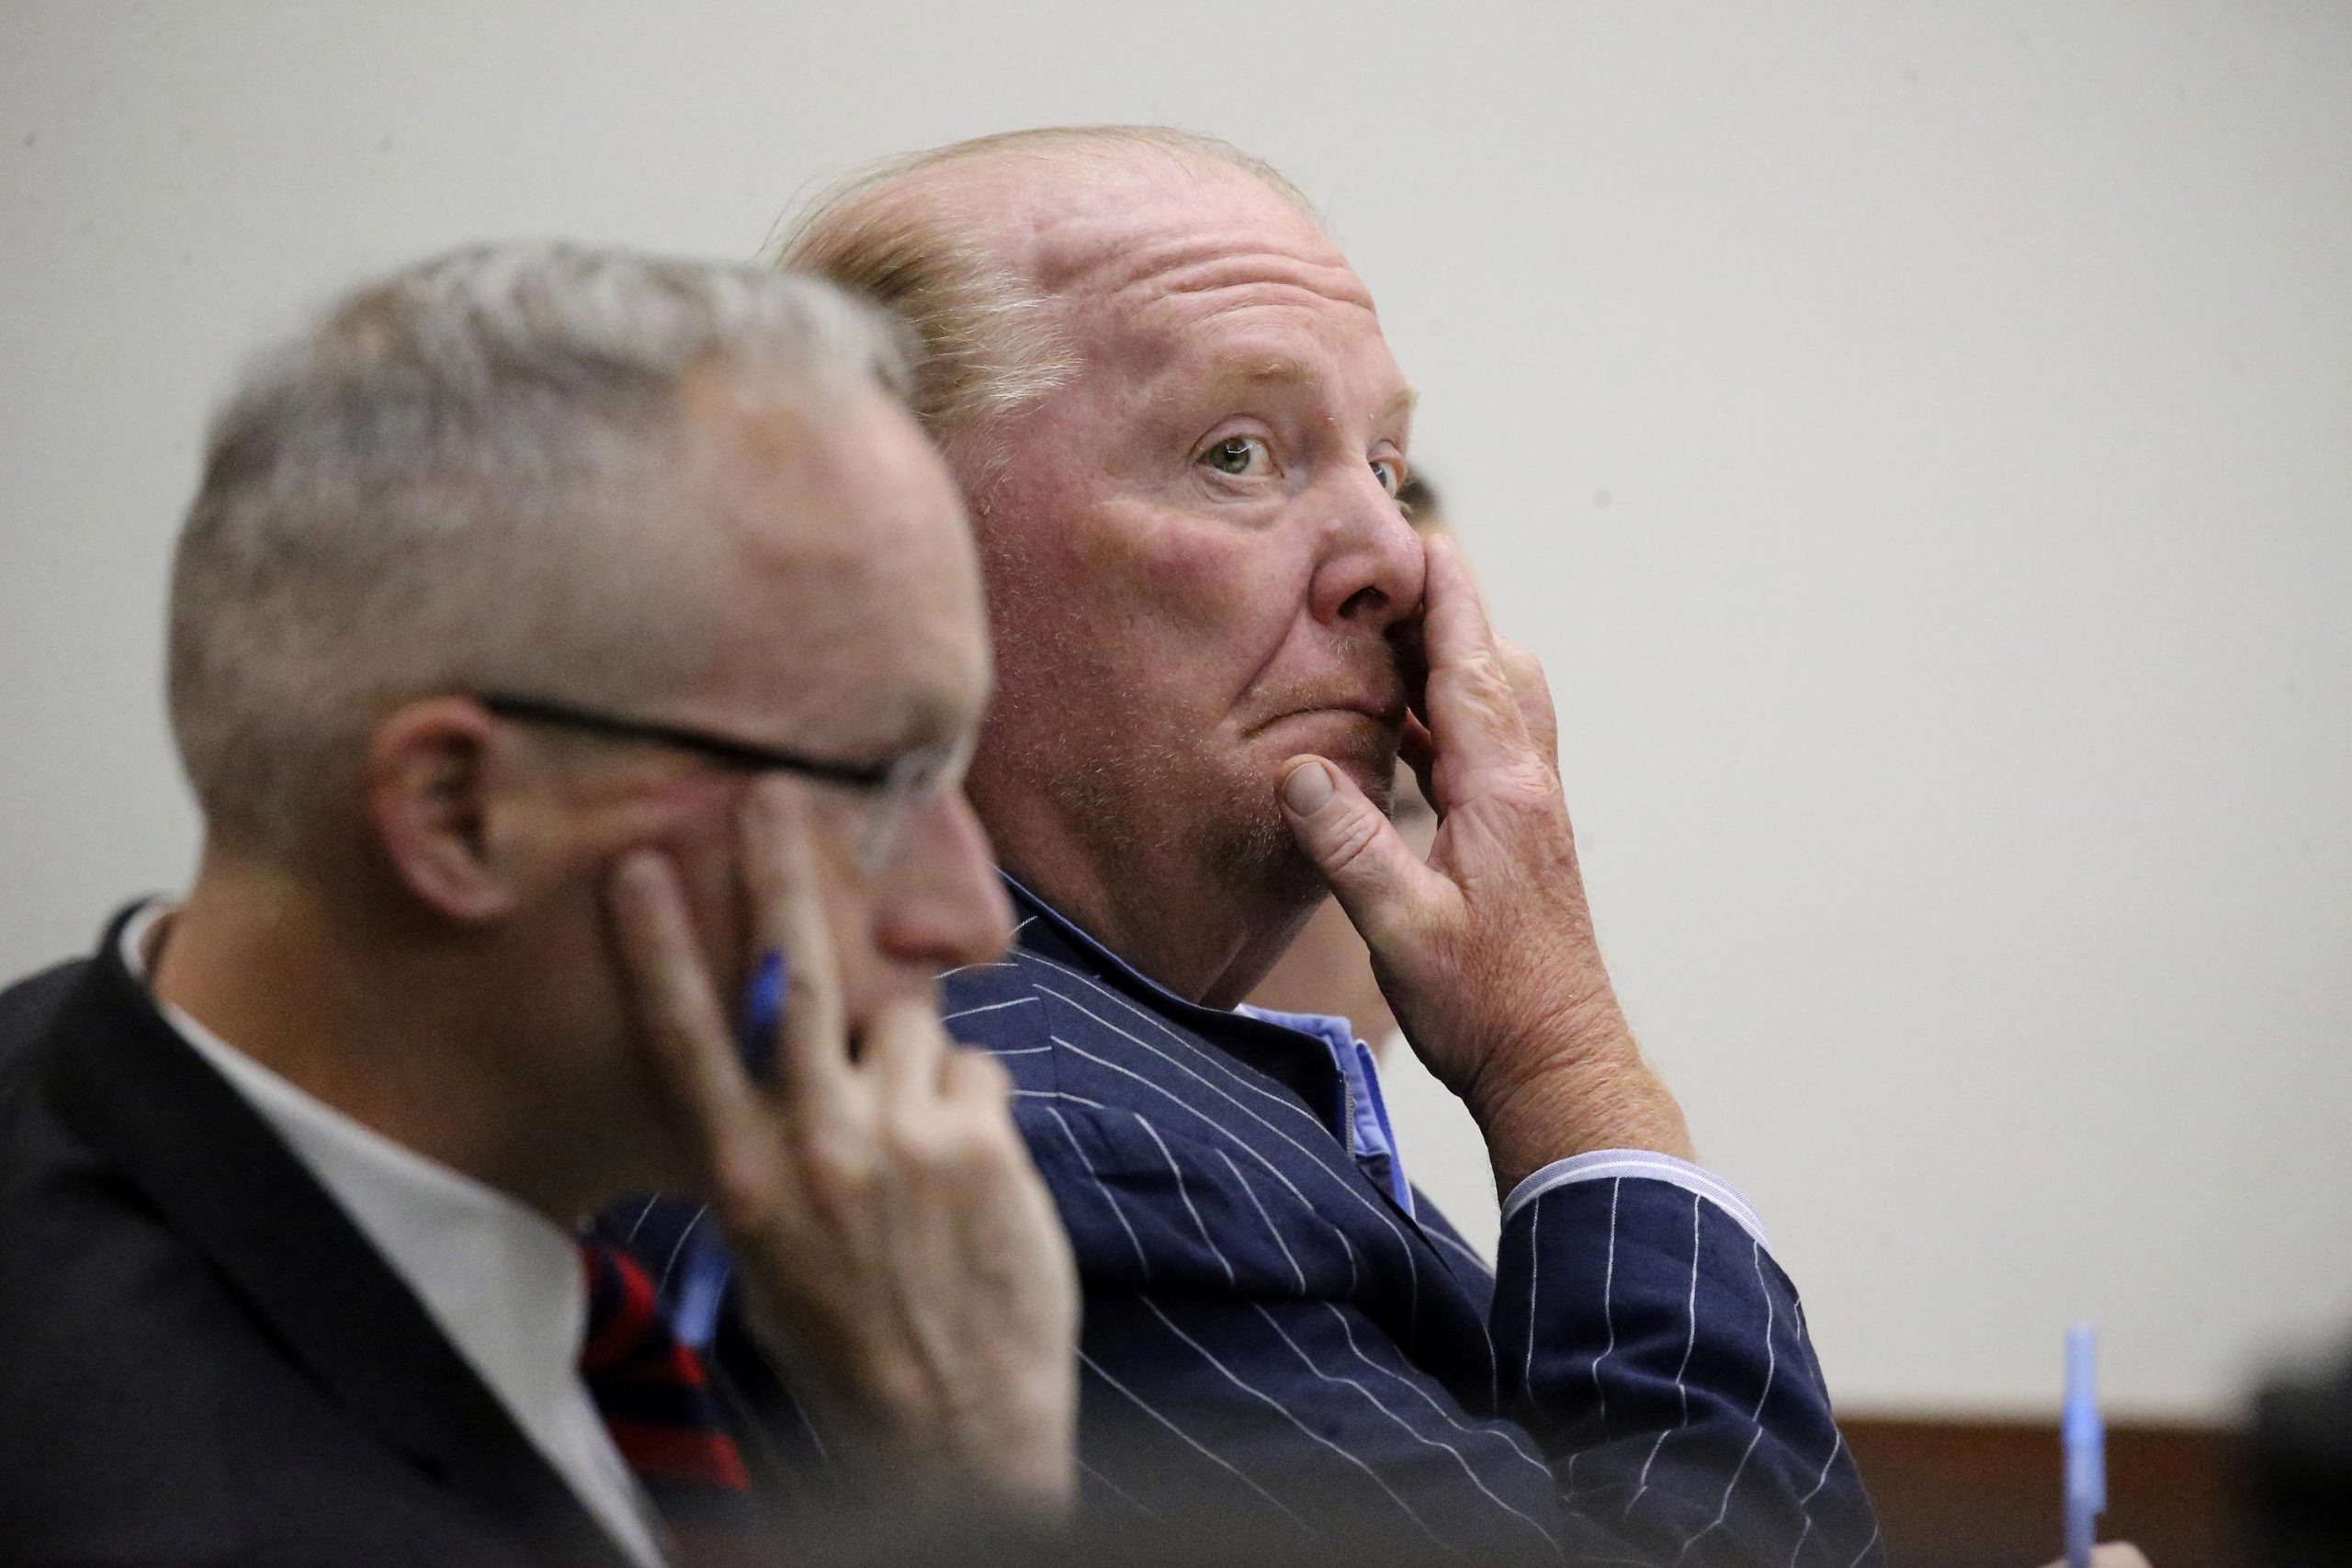 Mario Batali sexual misconduct trial: Day 2 updates